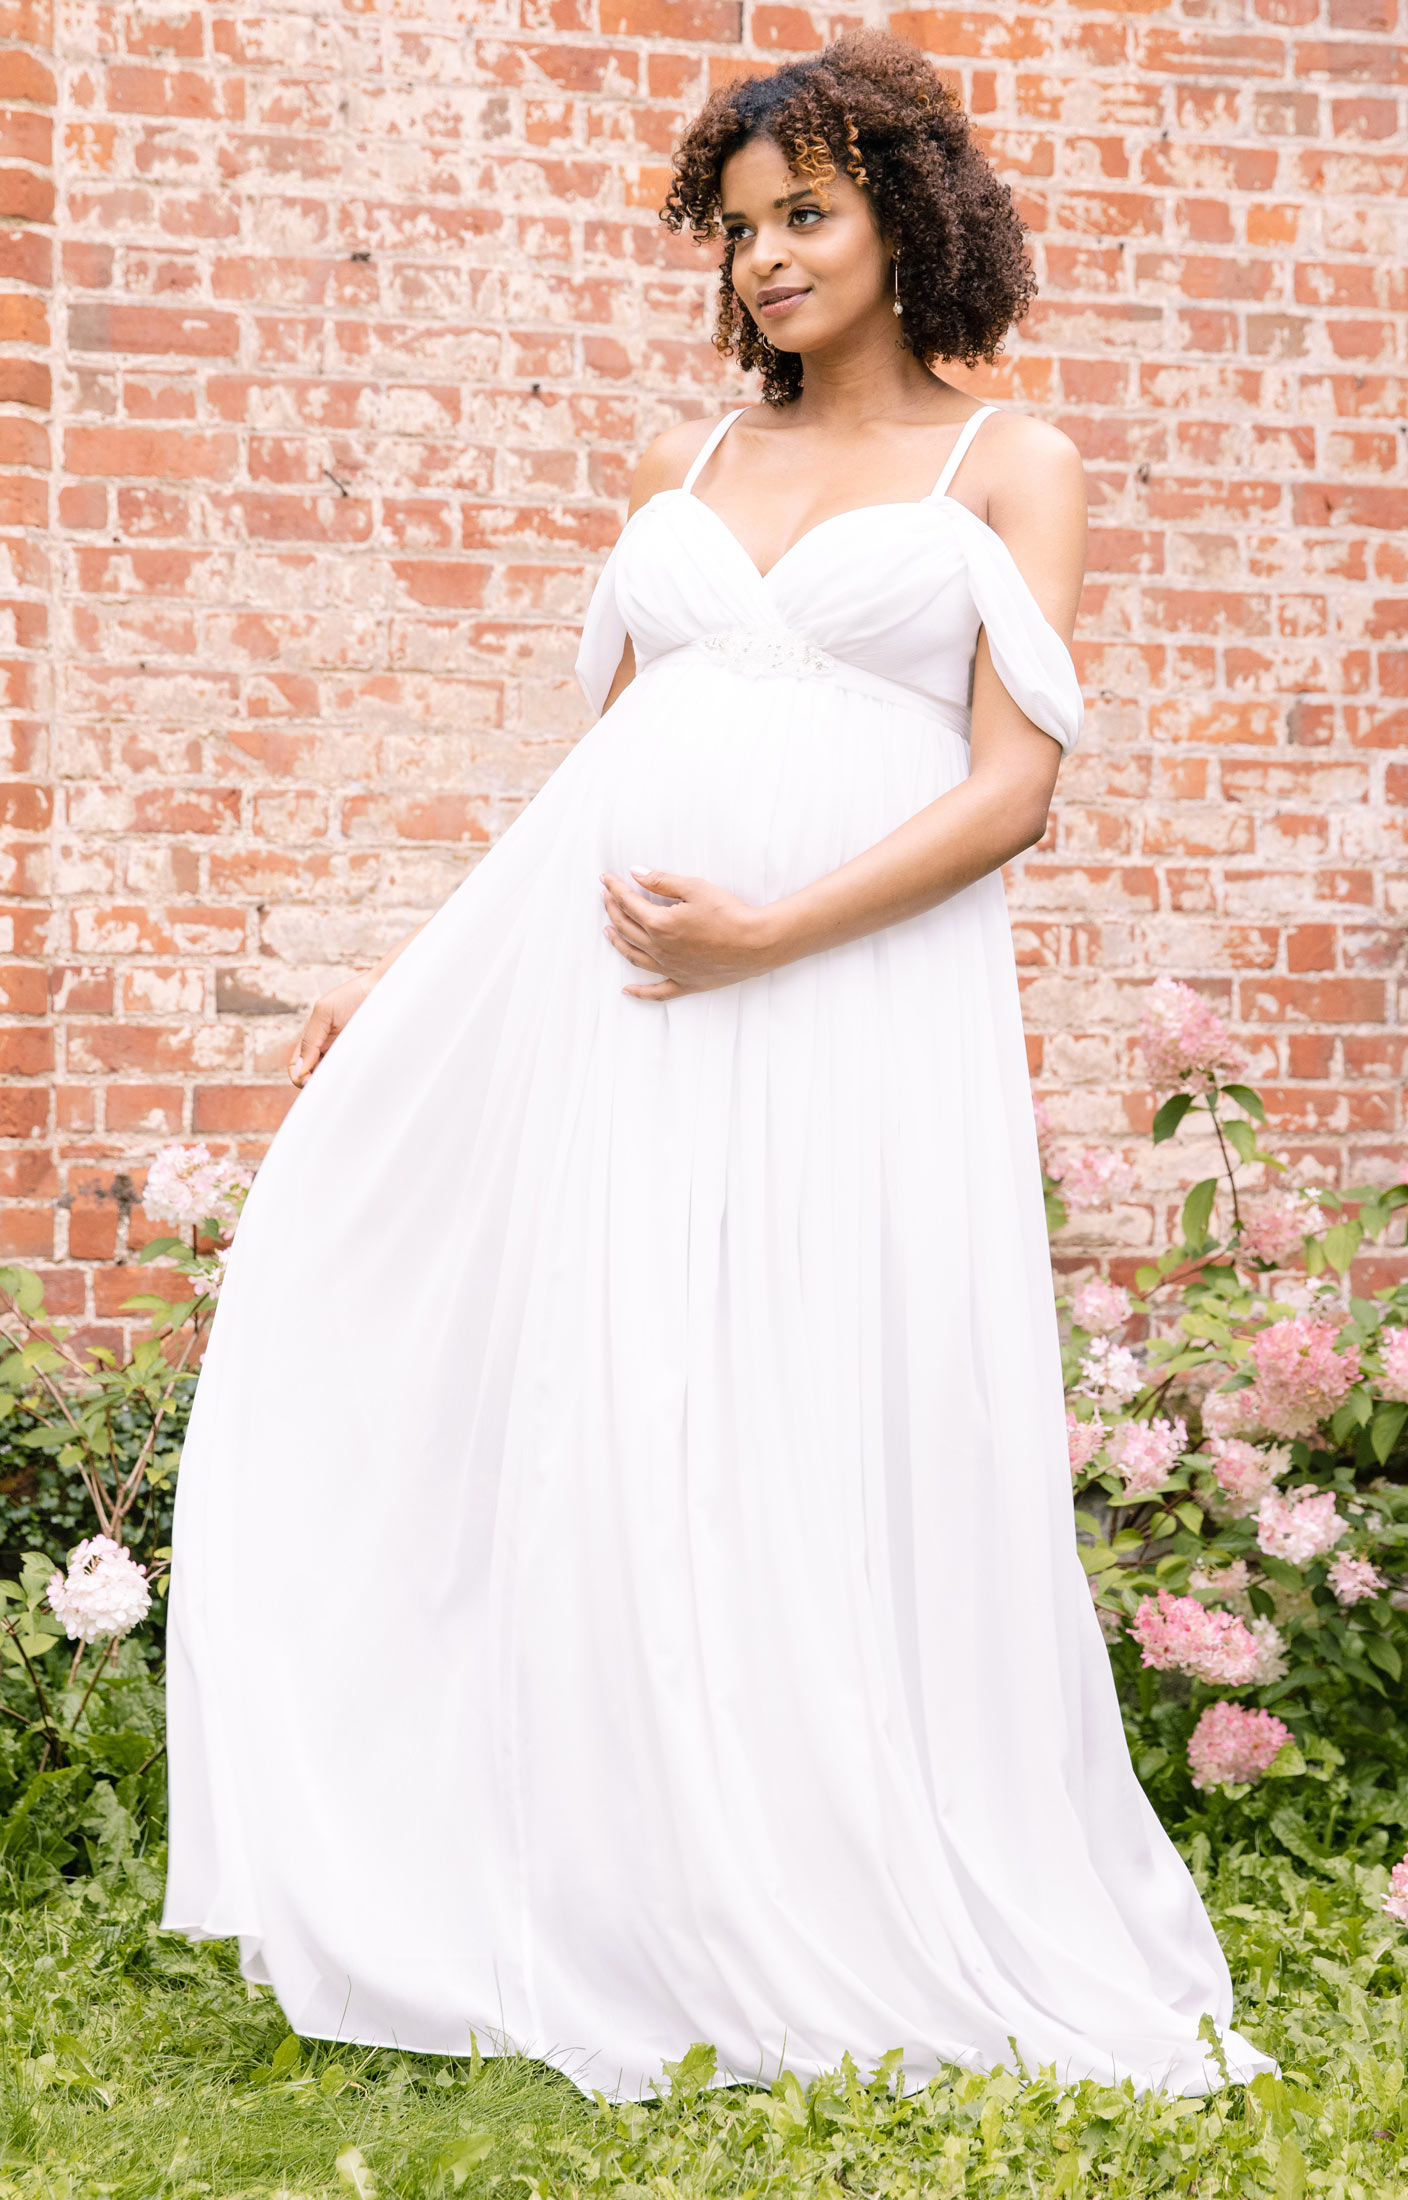 Woman Models Best Pregnancy Wedding Dresses That Are Absolutely Stunning -  PairedLife